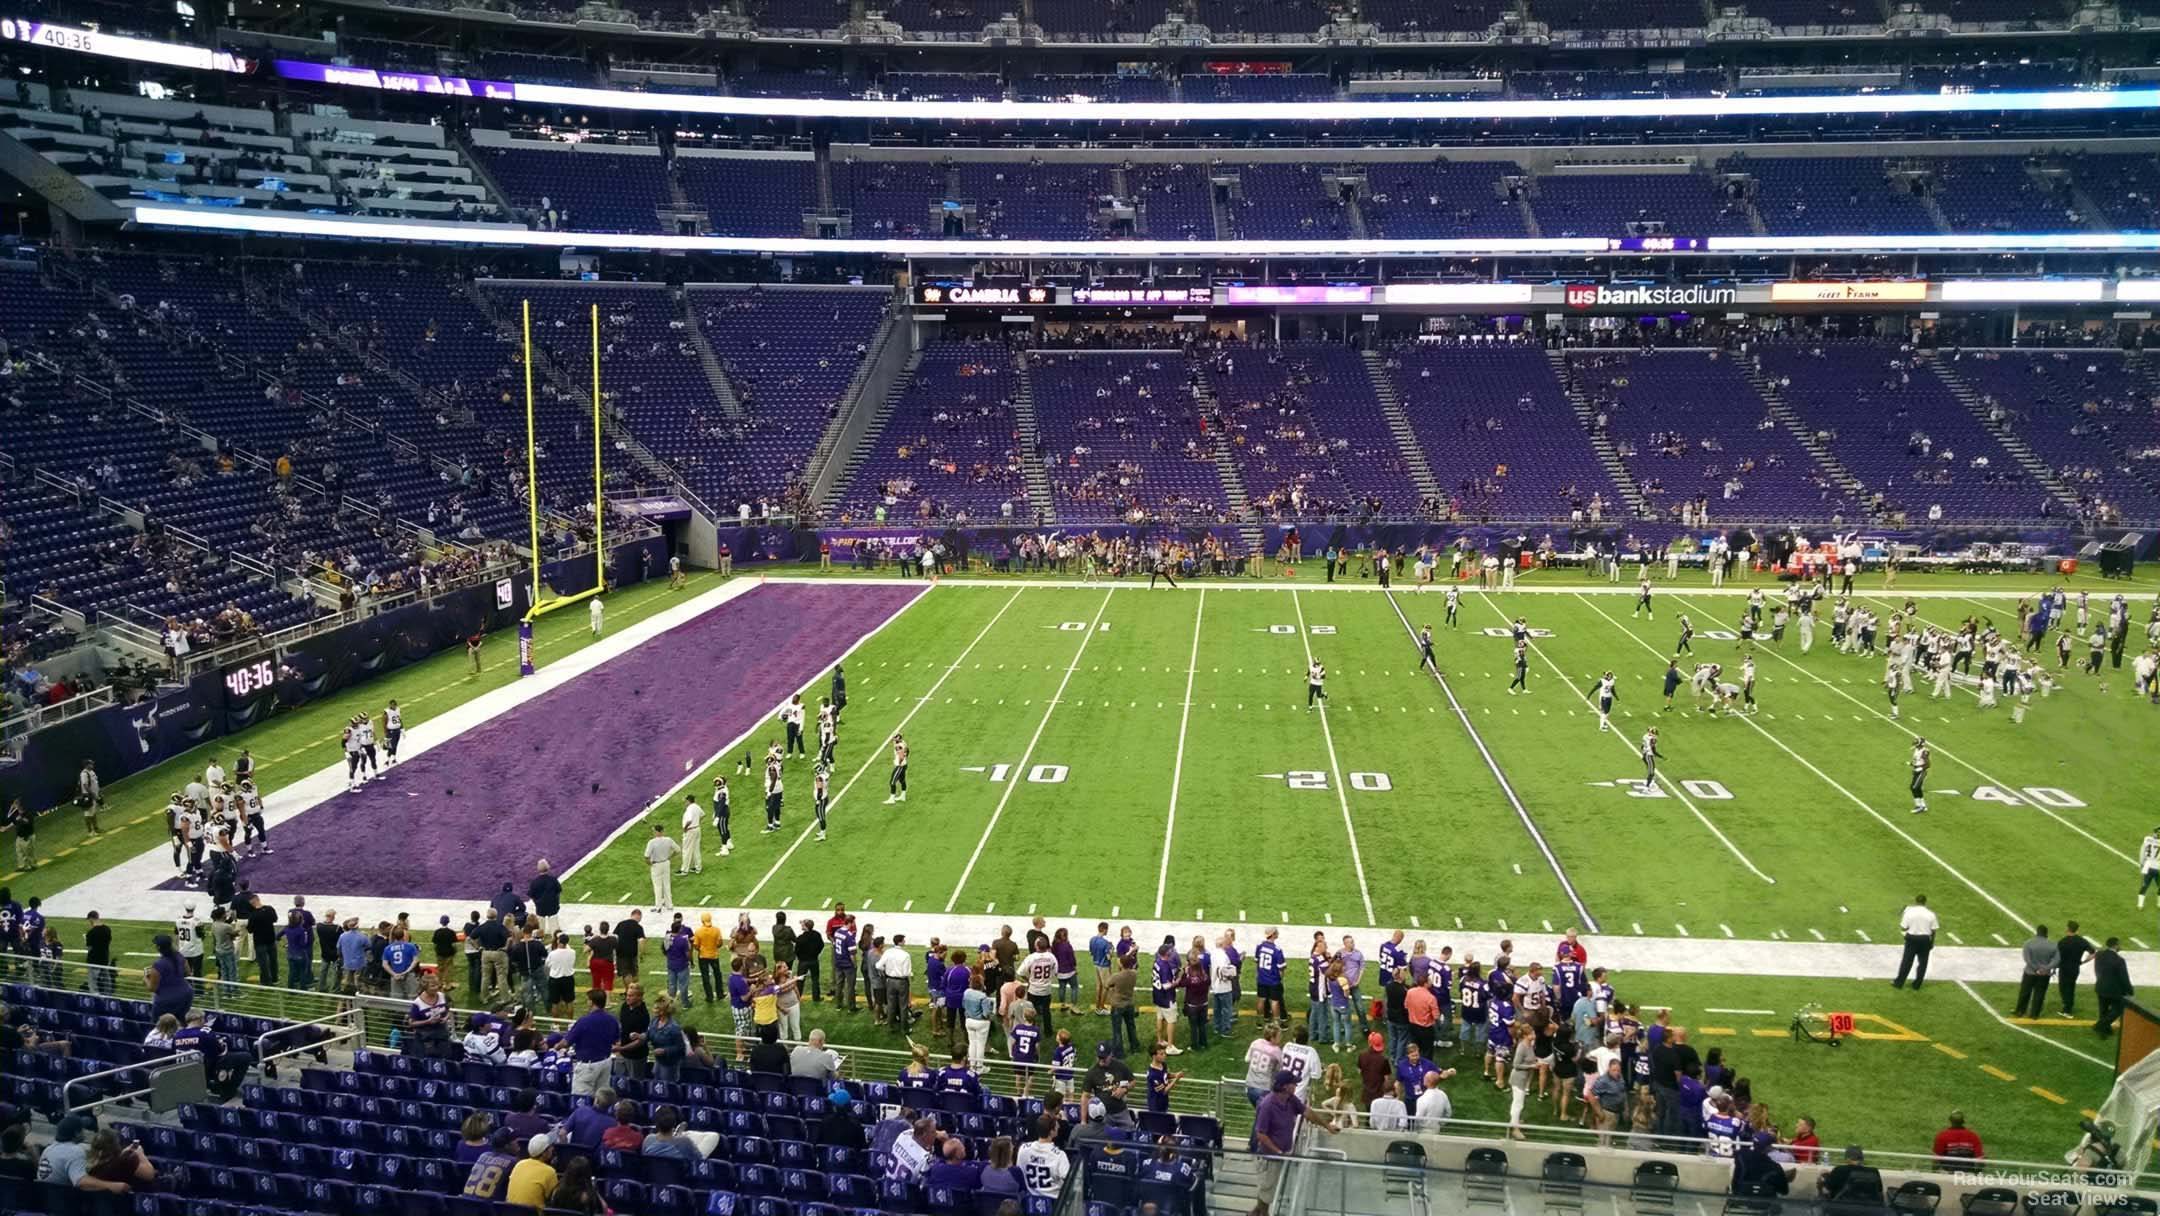 section 133, row 3 seat view  for football - u.s. bank stadium